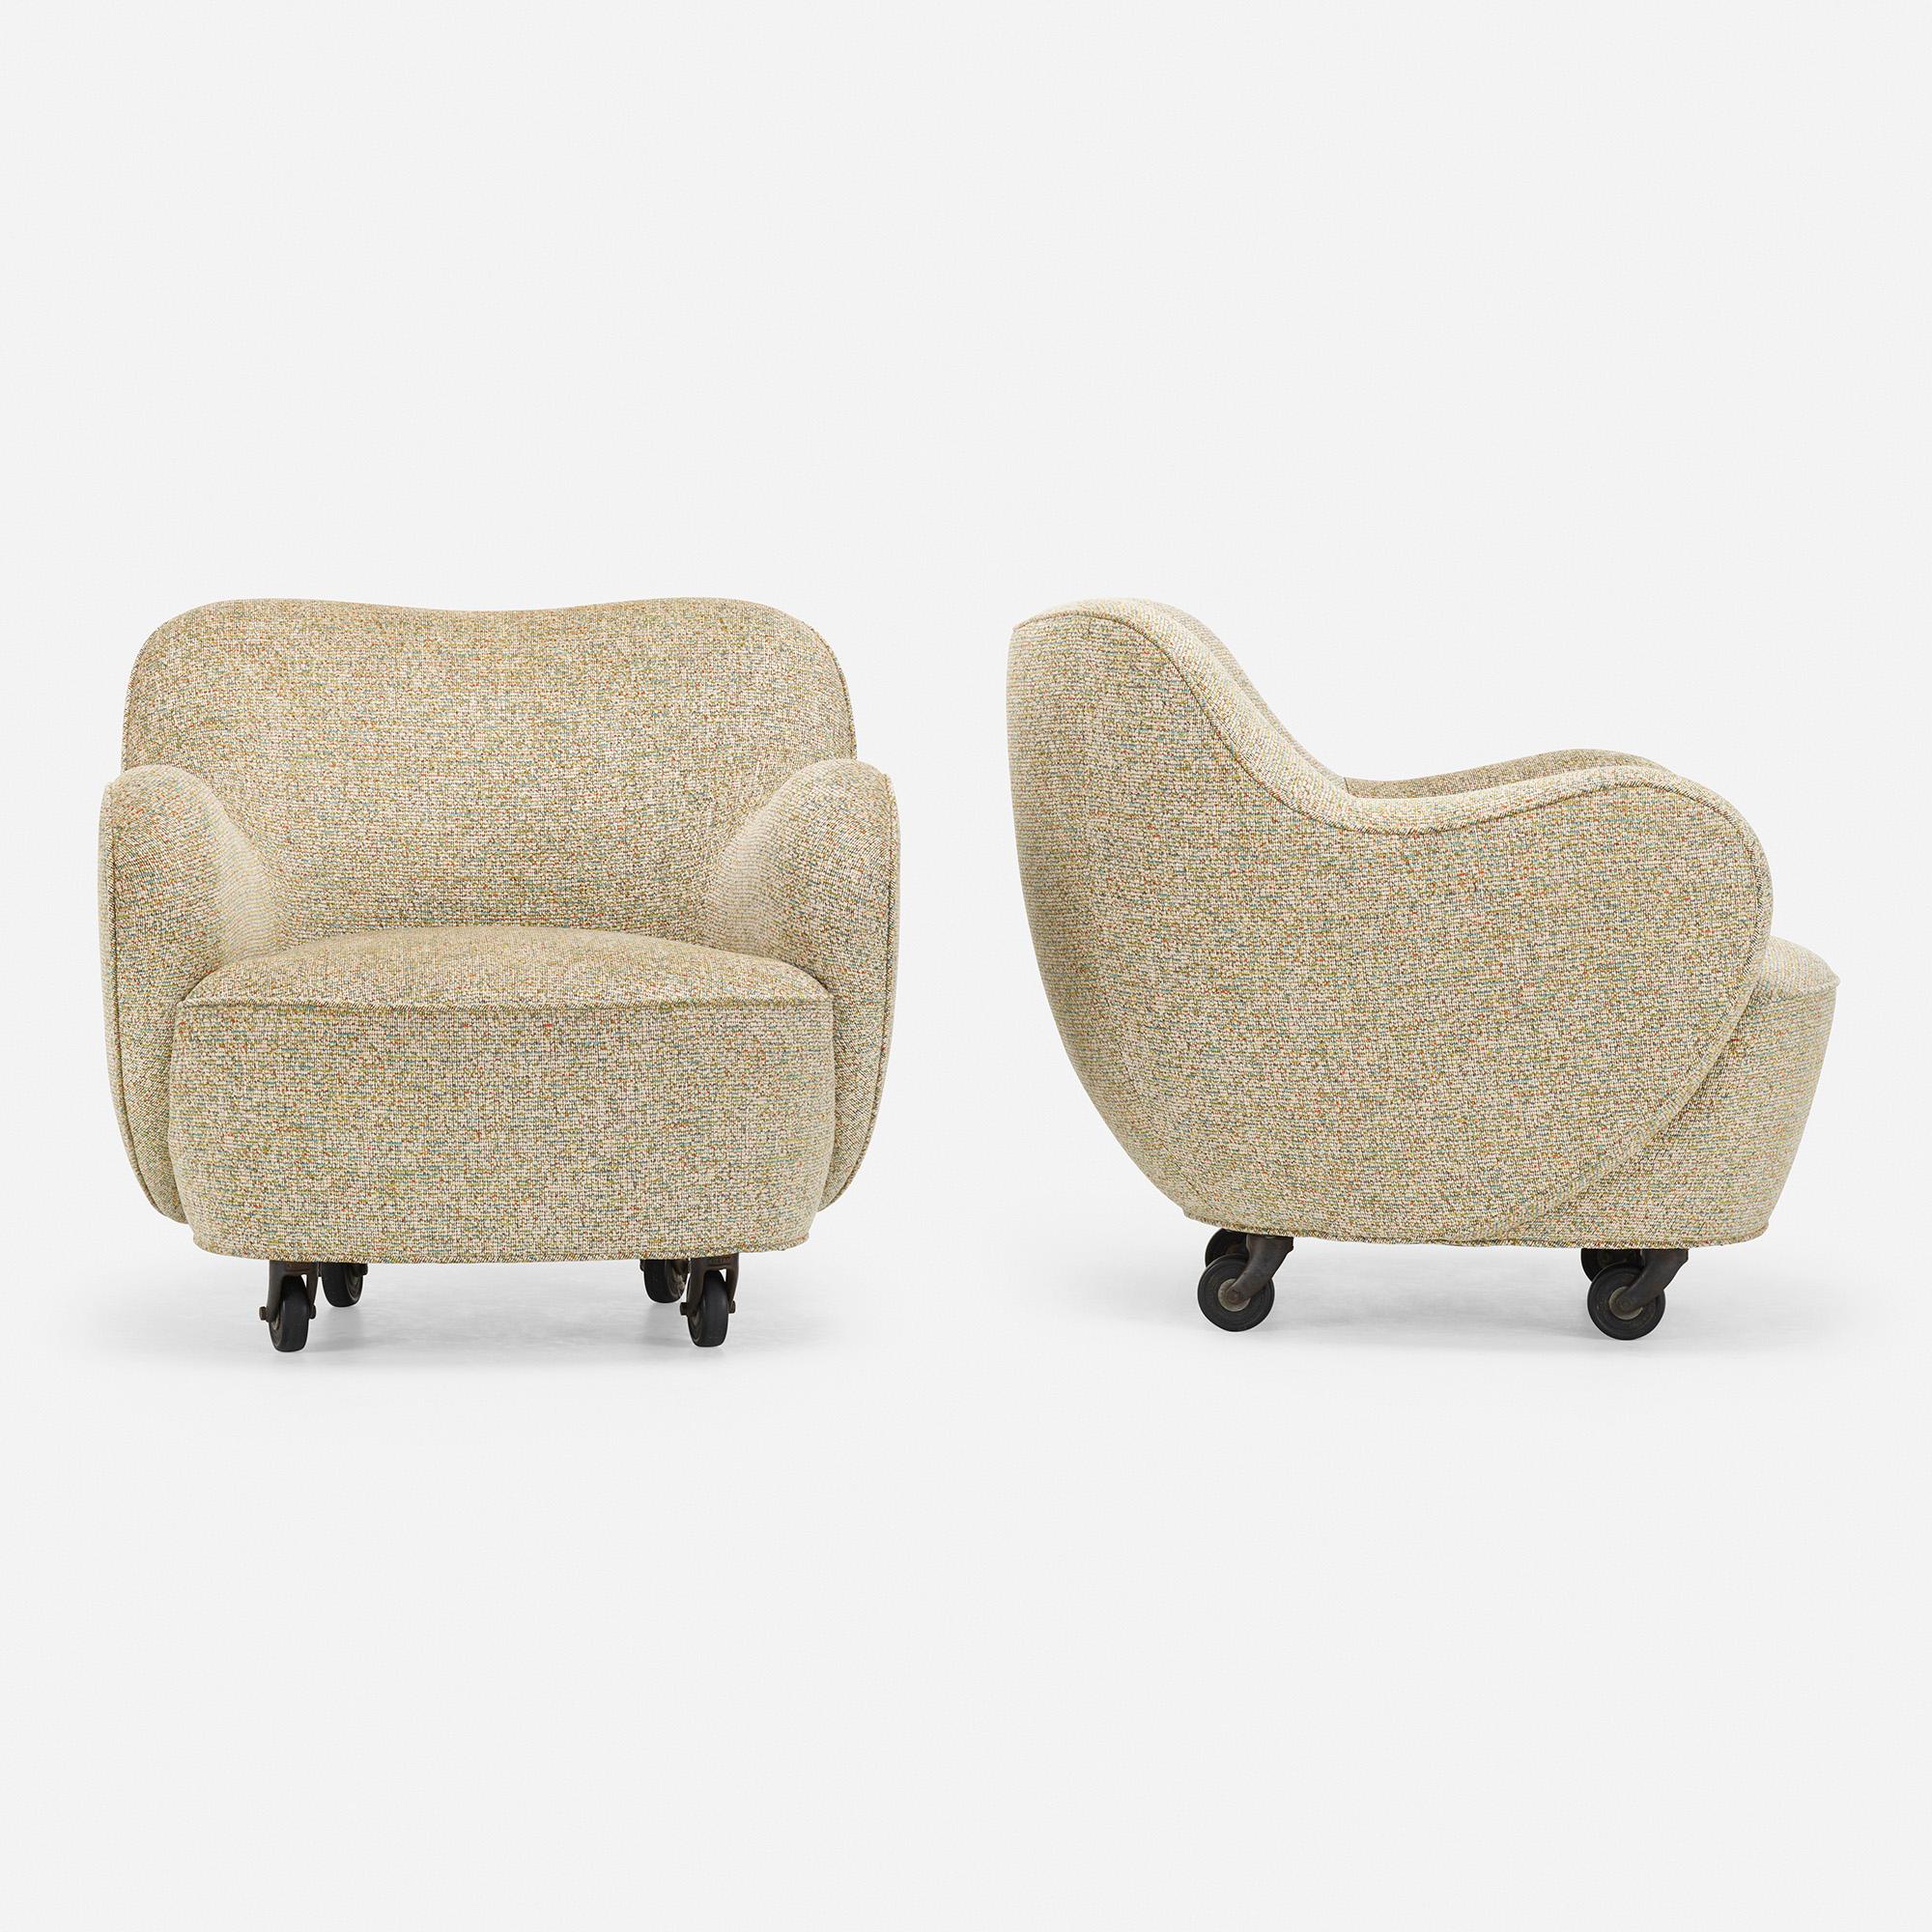 Vladimir Kagan Barrel Chairs, Pair In Excellent Condition For Sale In Chicago, IL